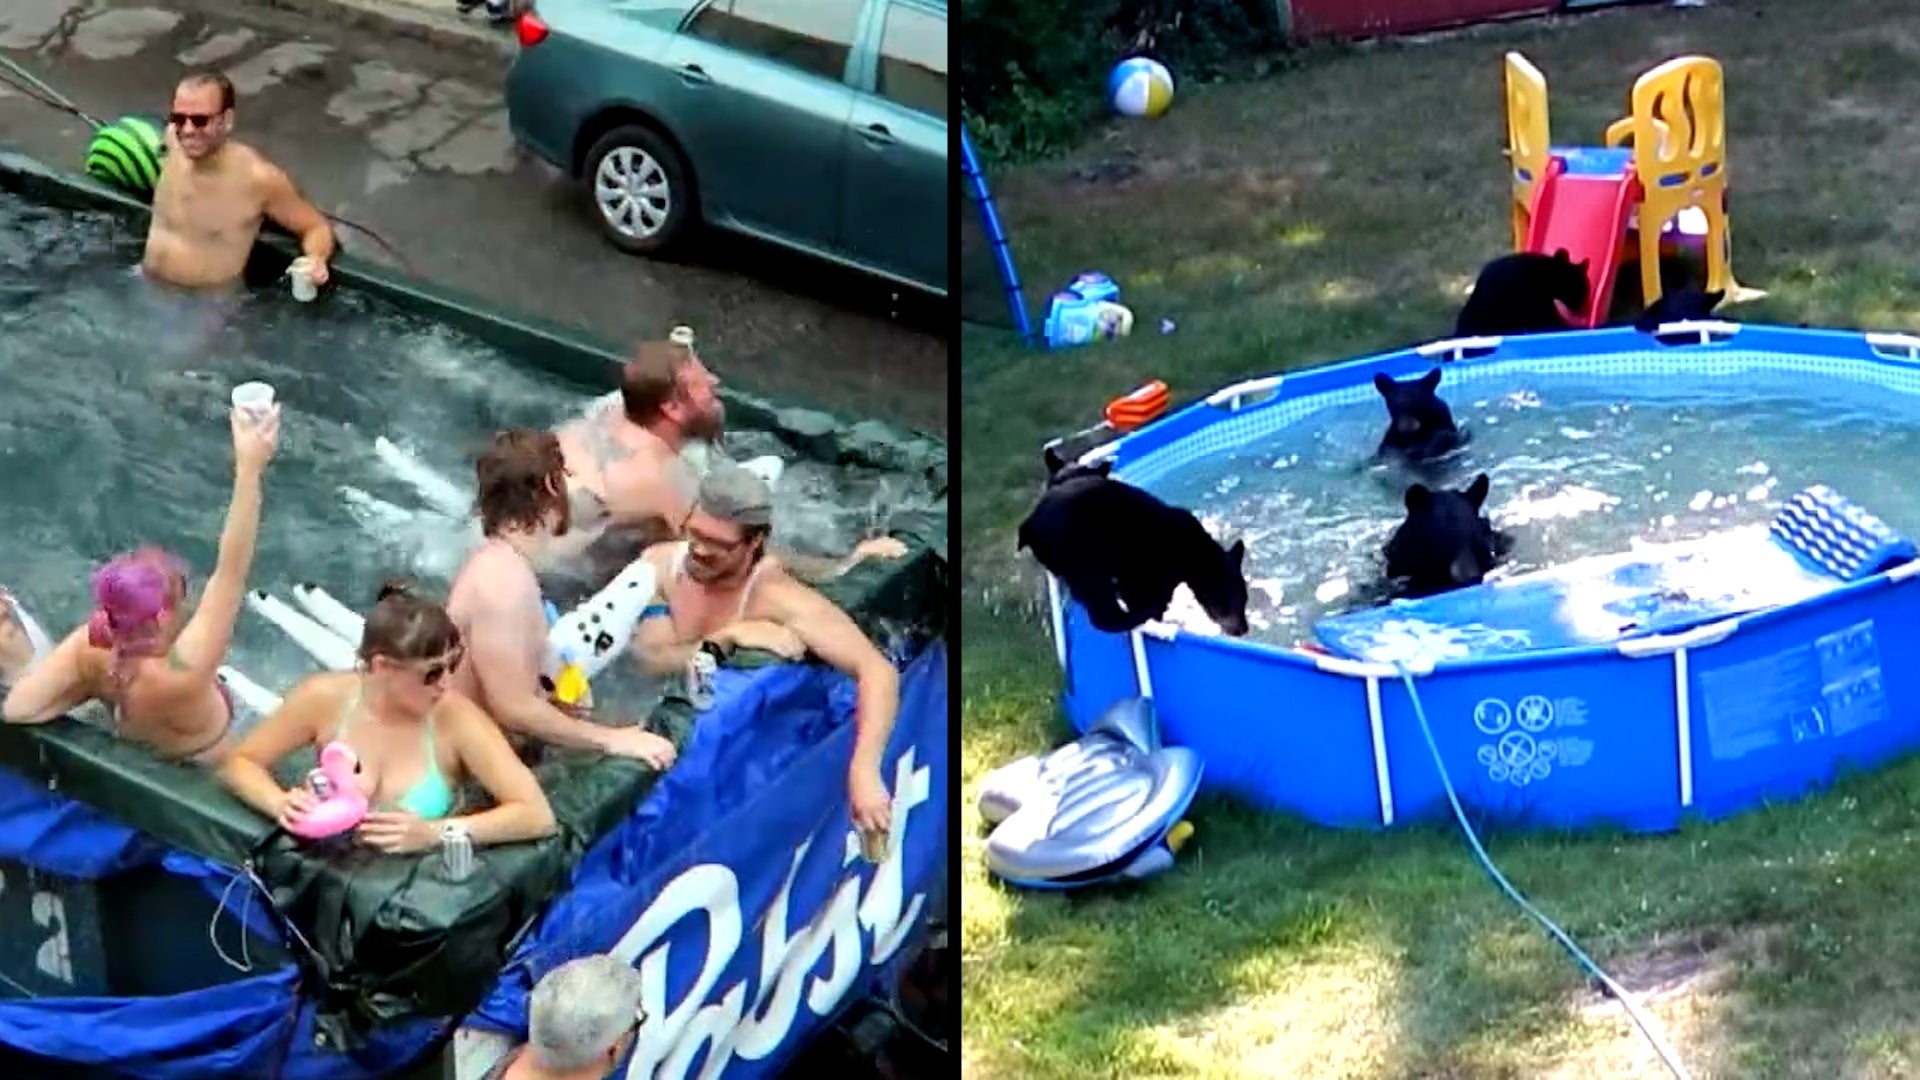 Bears Take Over New Jersey Family's Yard to Swim and Other Pool Party  Stories | Inside Edition